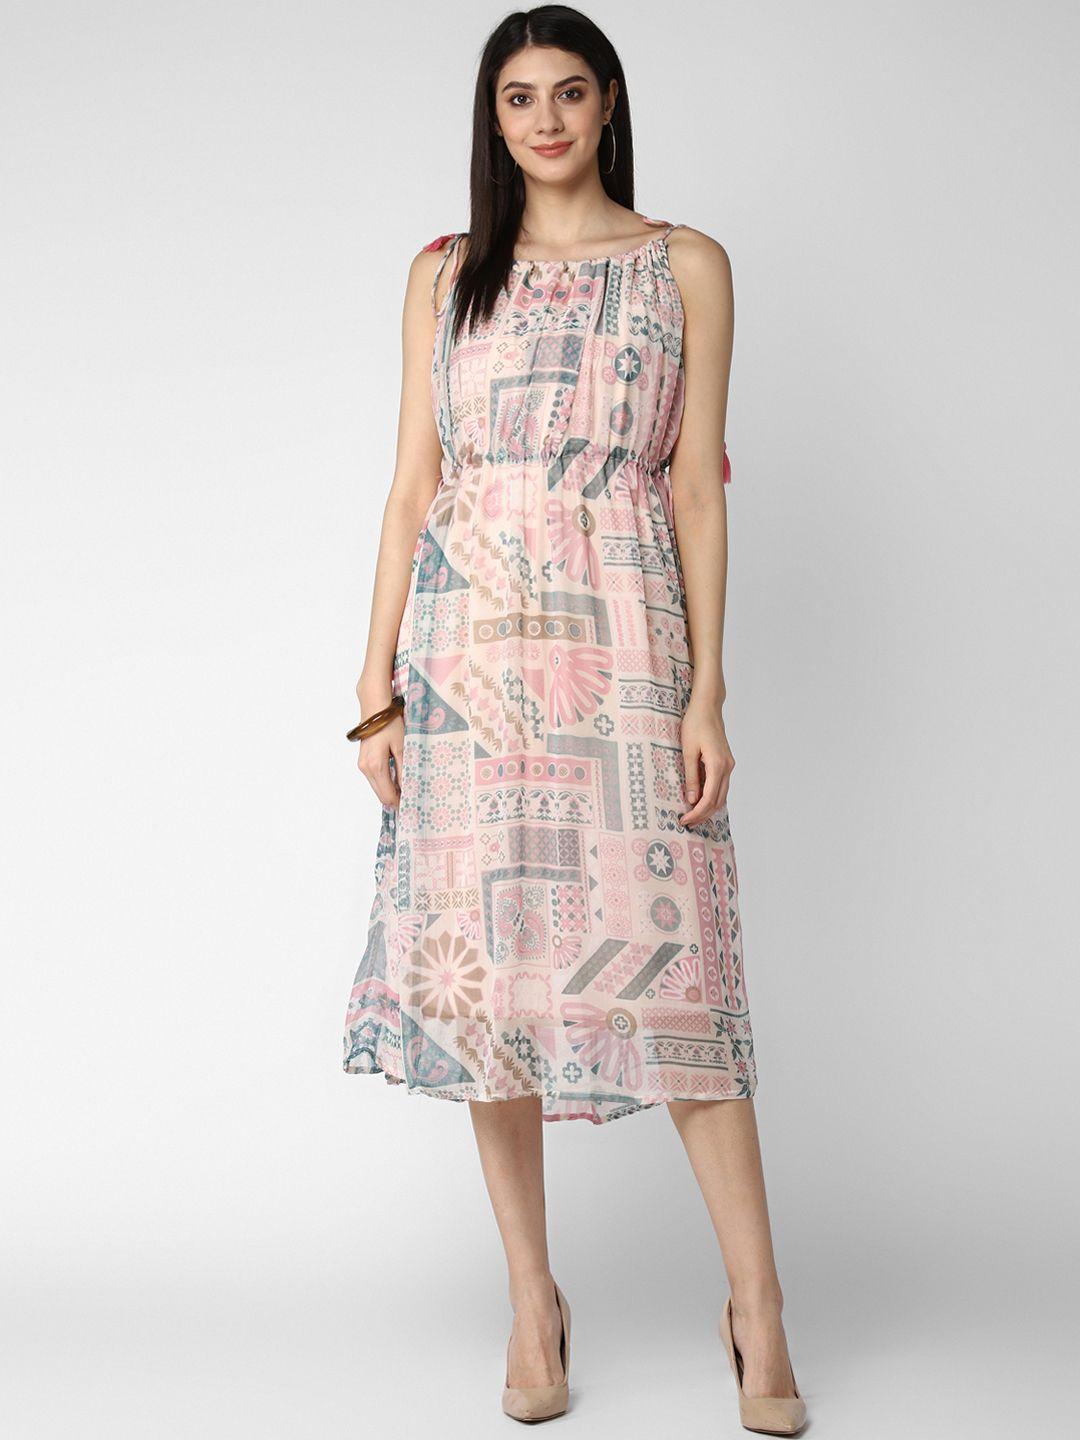 stylestone-women-pink-&-white-printed-fit-and-flare-dress-with-tie-up